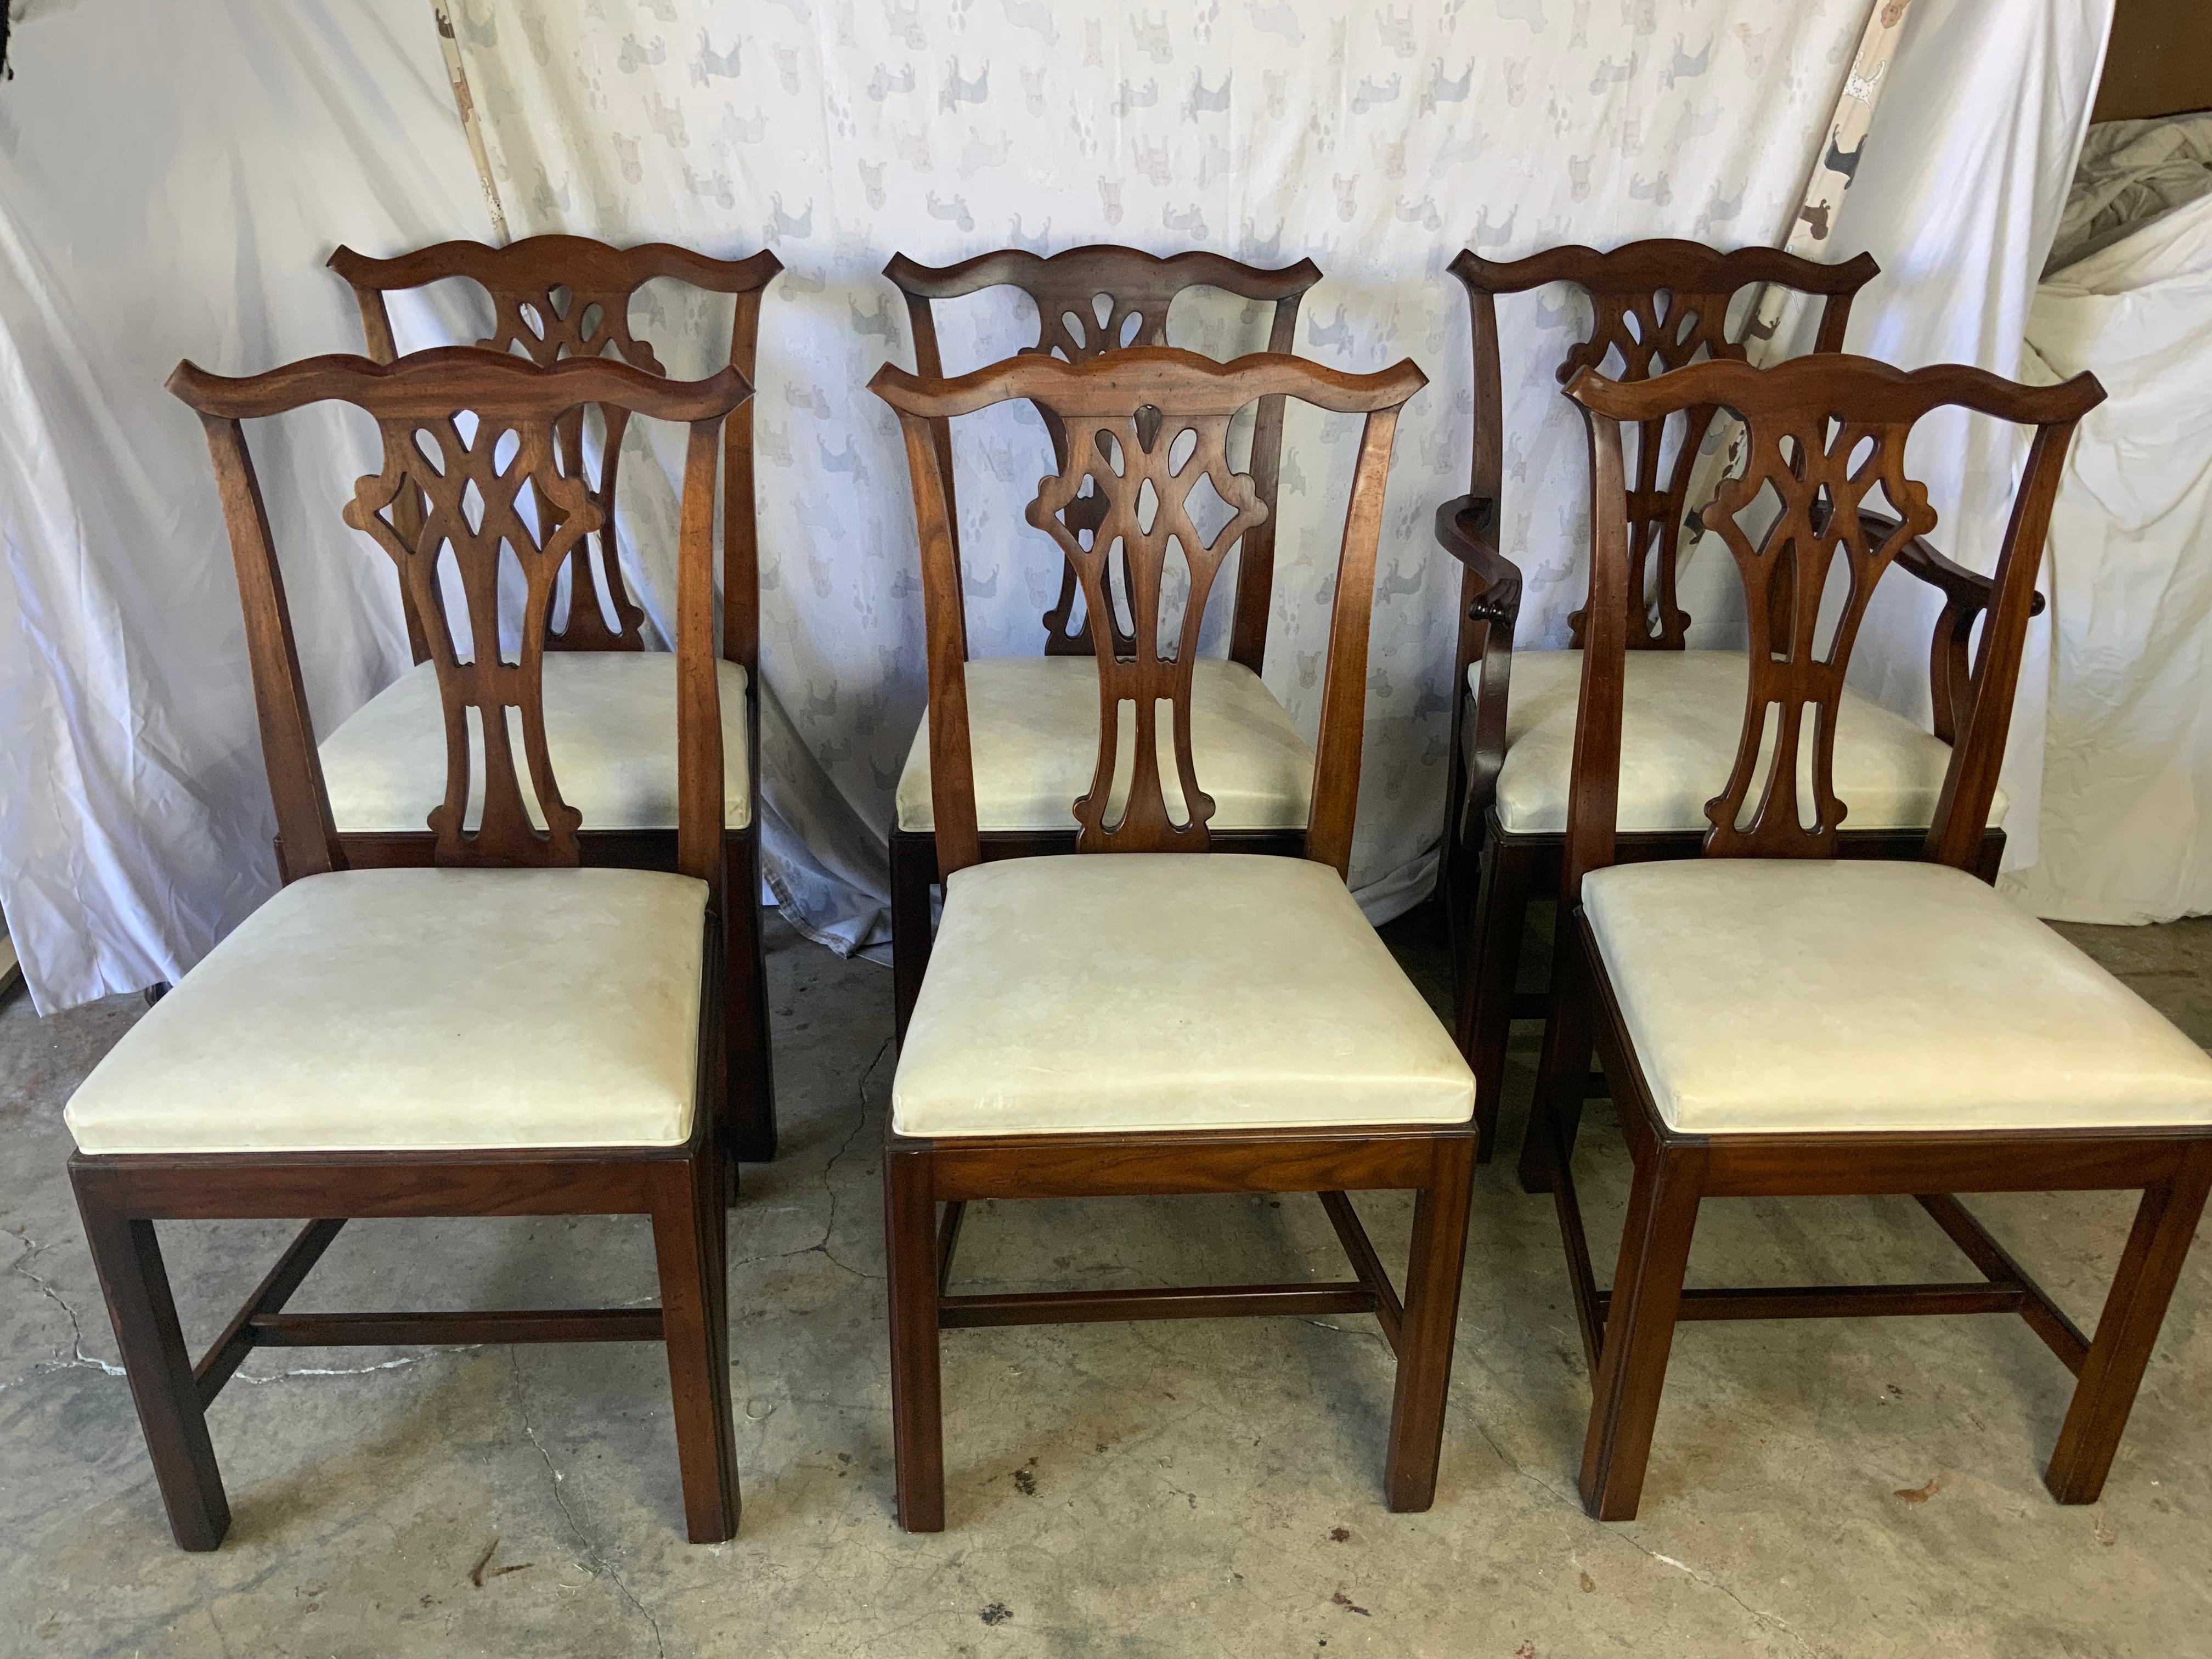 A very well kept set of six Kindel Chippendale style Cherry dining chairs consisting of one arm and five sides. These chairs are in very good original condition showing very minimal use and still retaining the original upholstered seats. No repairs